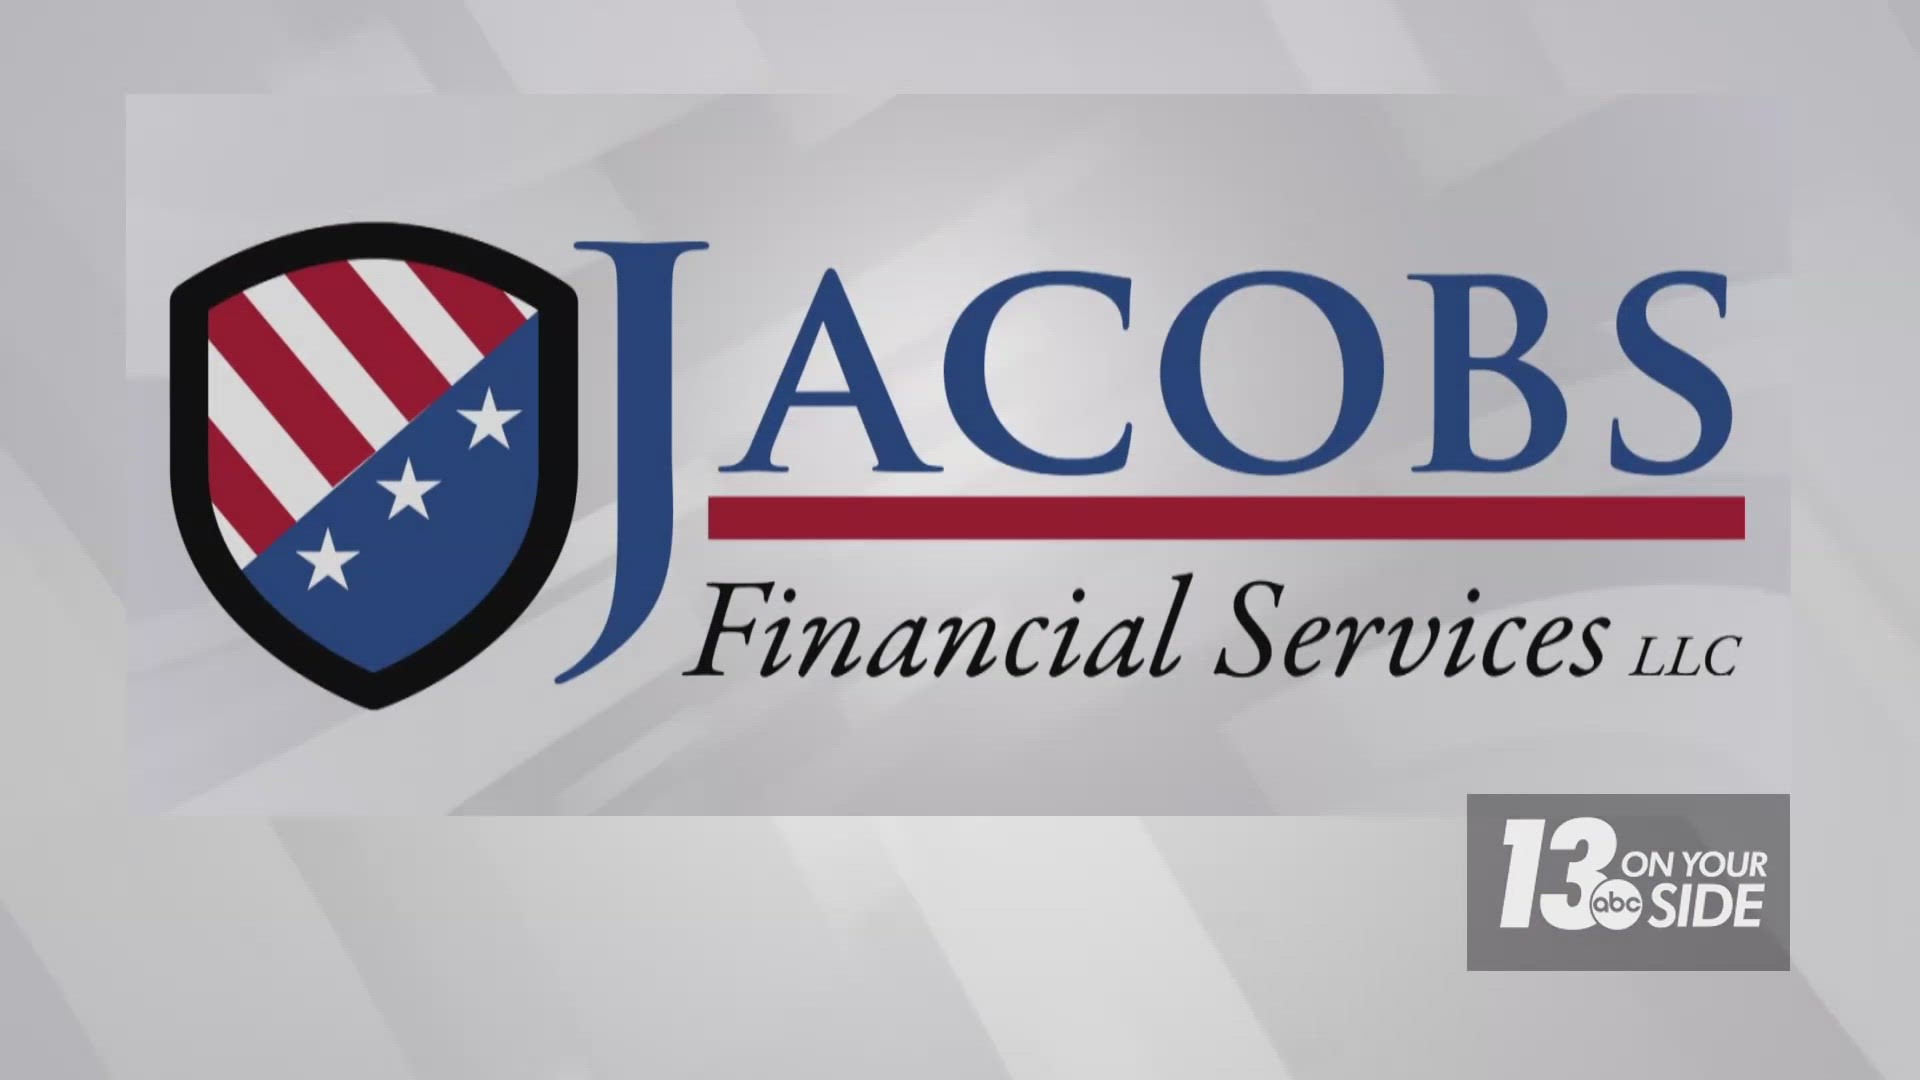 Some people say retirement feels like vacation, but that’s a privilege that requires some planning, and Tom Jacobs from Jacobs Financial Services wants to help.